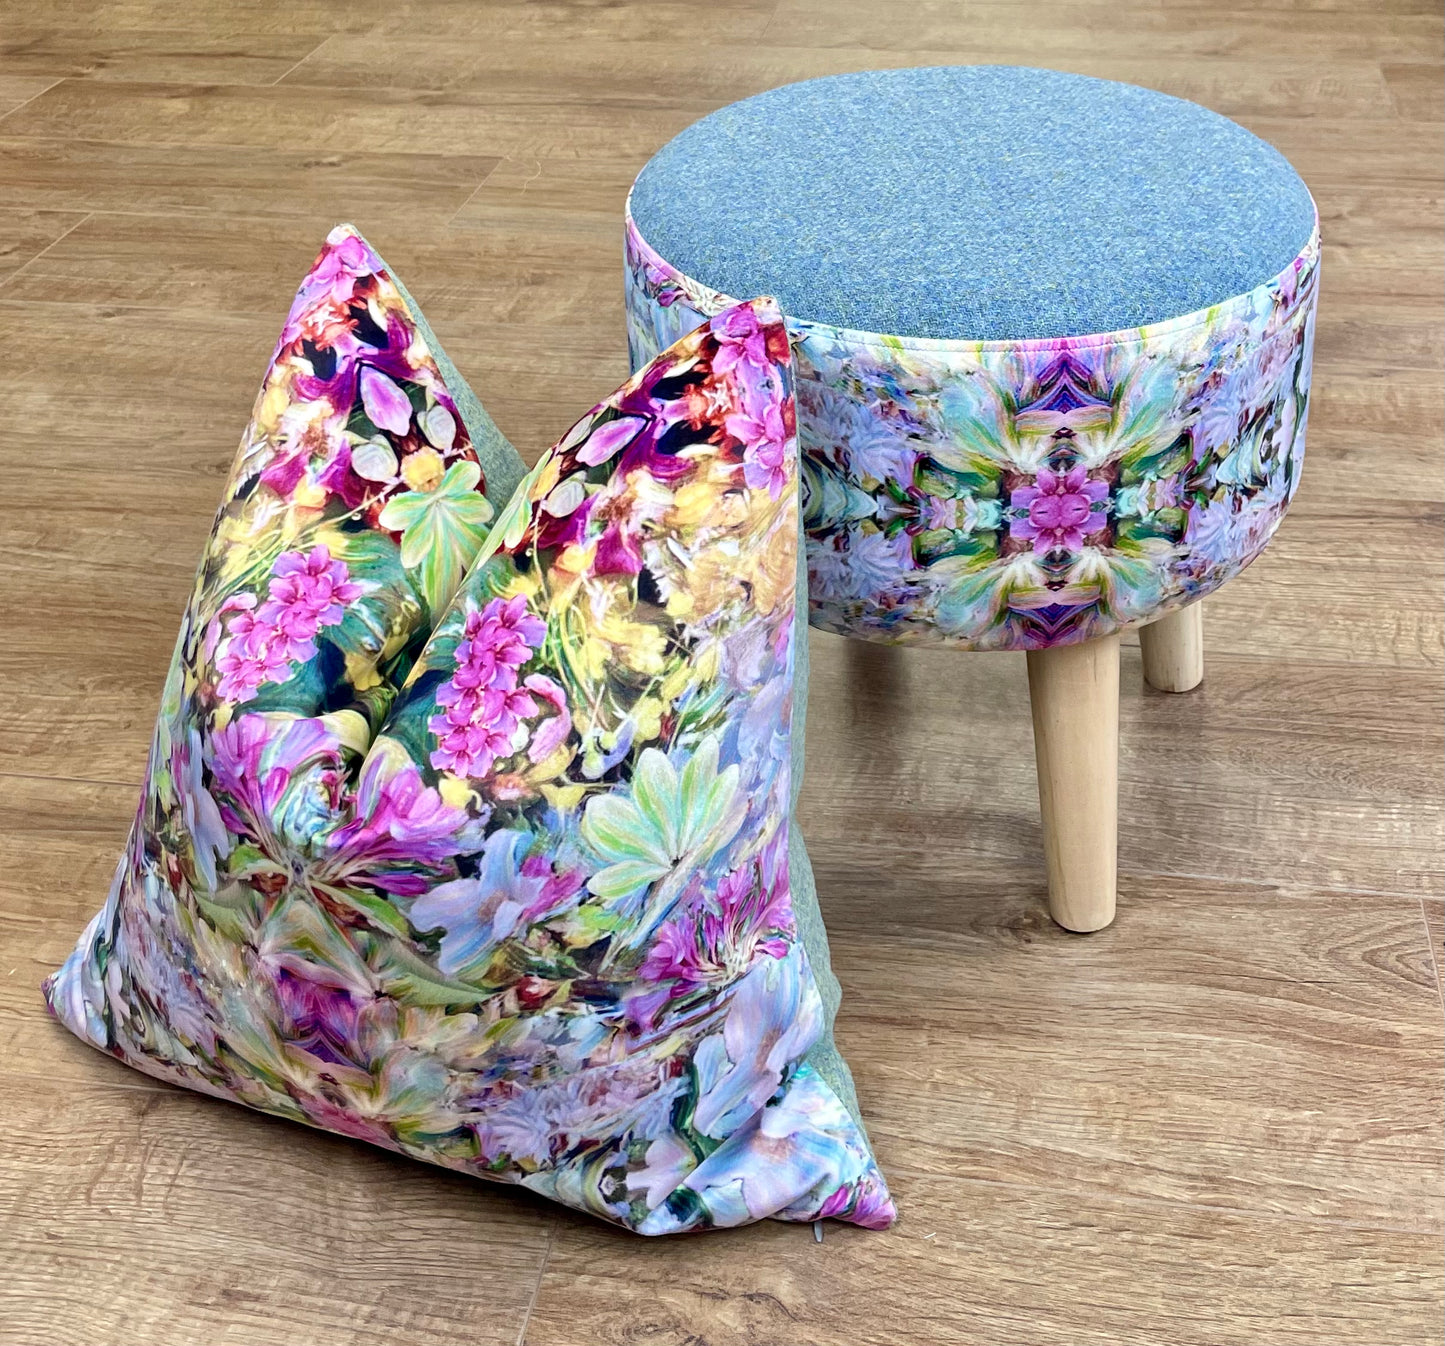 Floral Velvet and Light Blue Harris Tweed Upholstered Footstool with Light Rustic Wooden Legs.